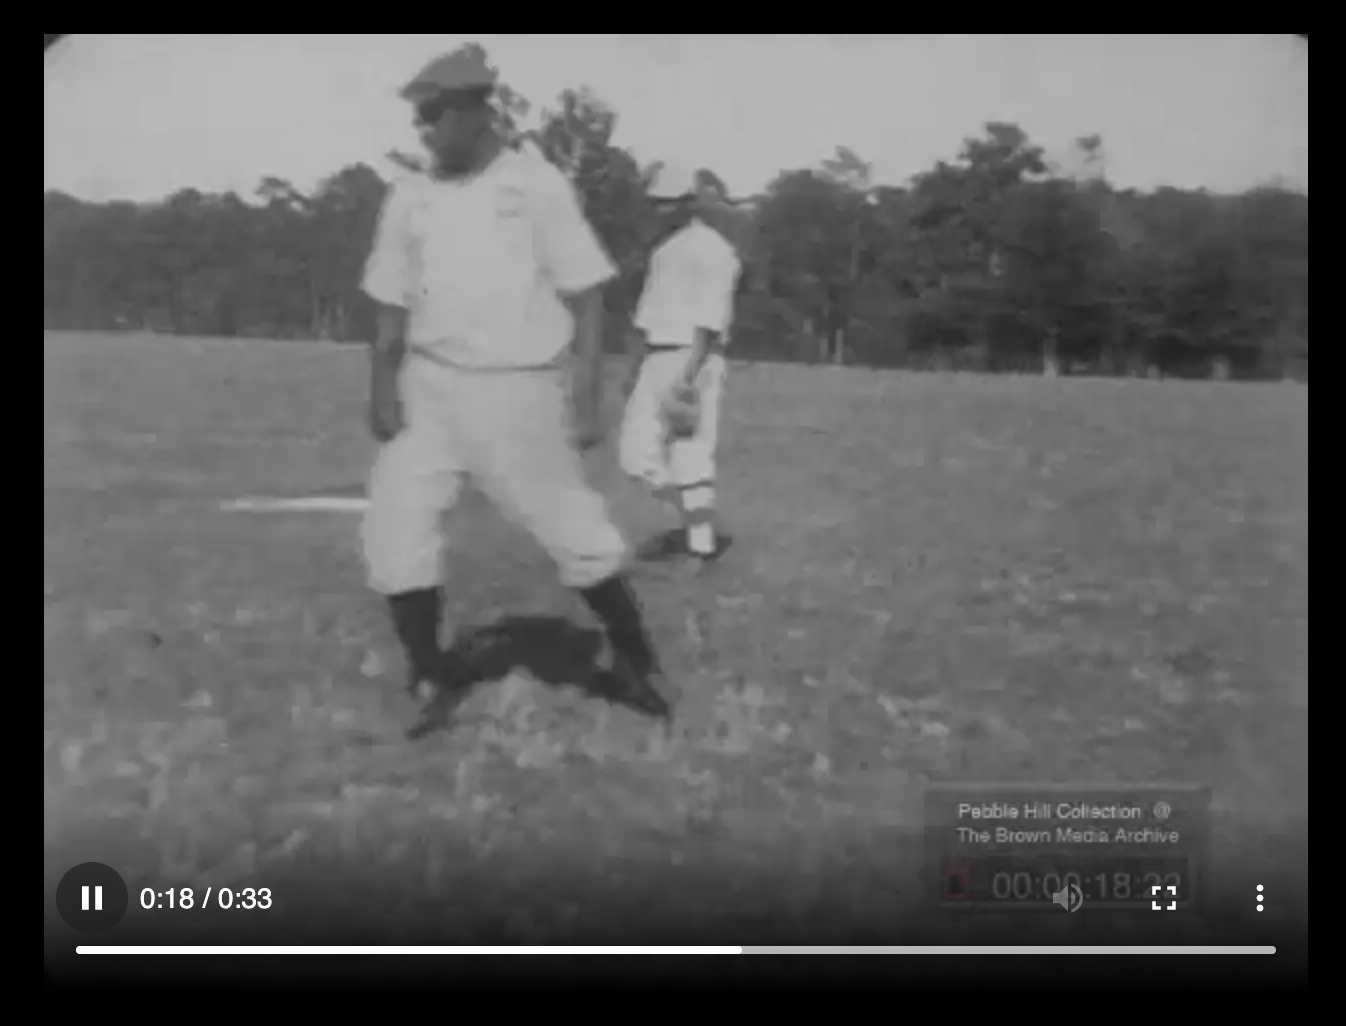 How I Identified The Earliest Surviving Film Footage of African American Baseball Players